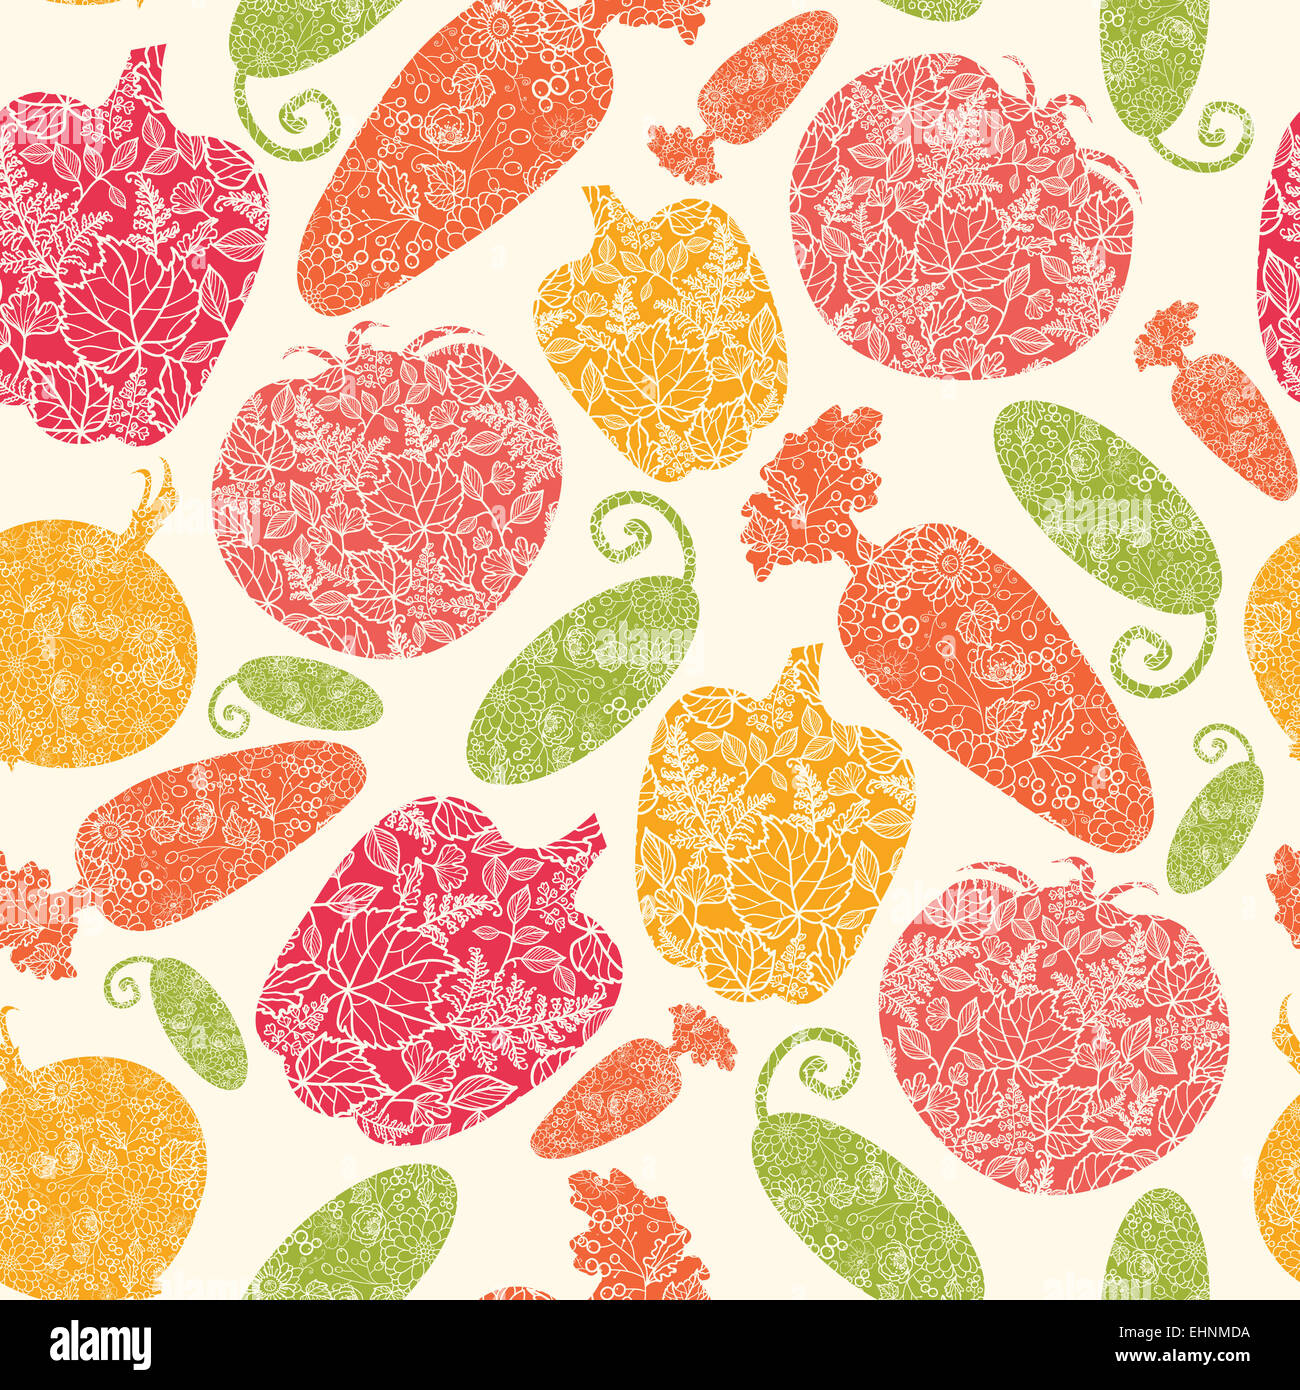 Textured vegetables seamless pattern background Stock Photo